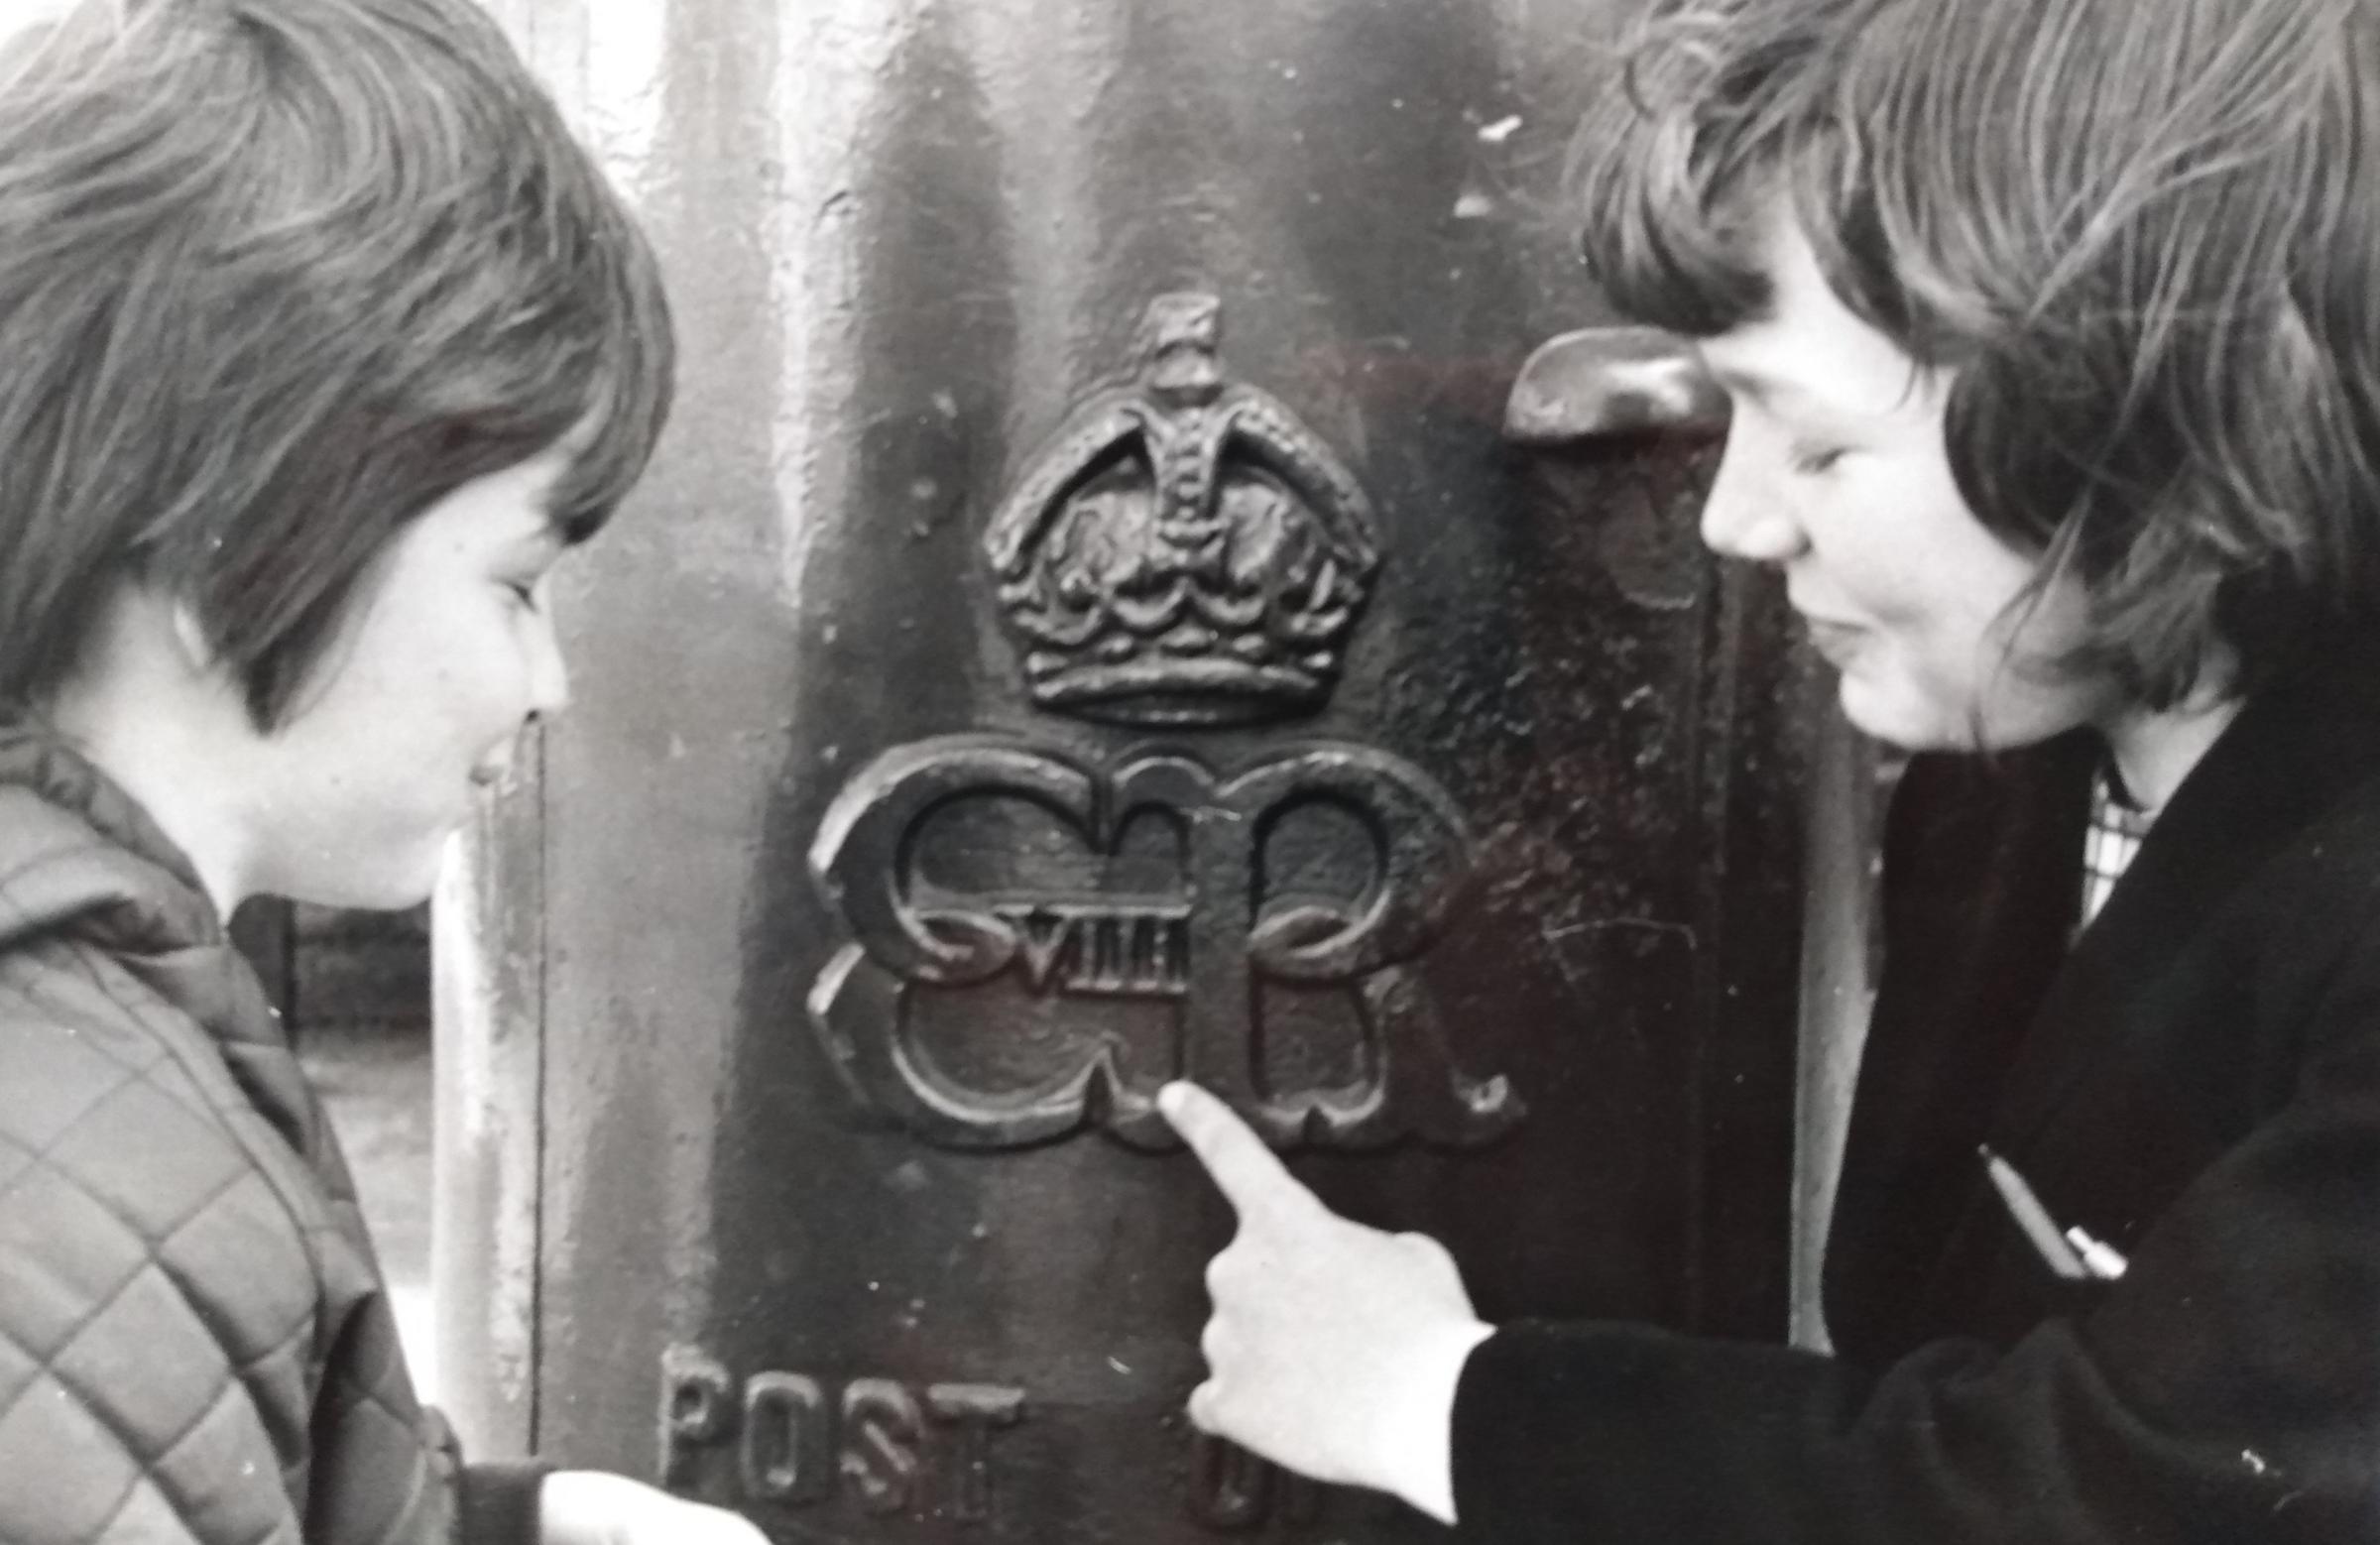 May 1970 was the date for this picture of the Edward VIII post box. Sadly the girls are unidentified